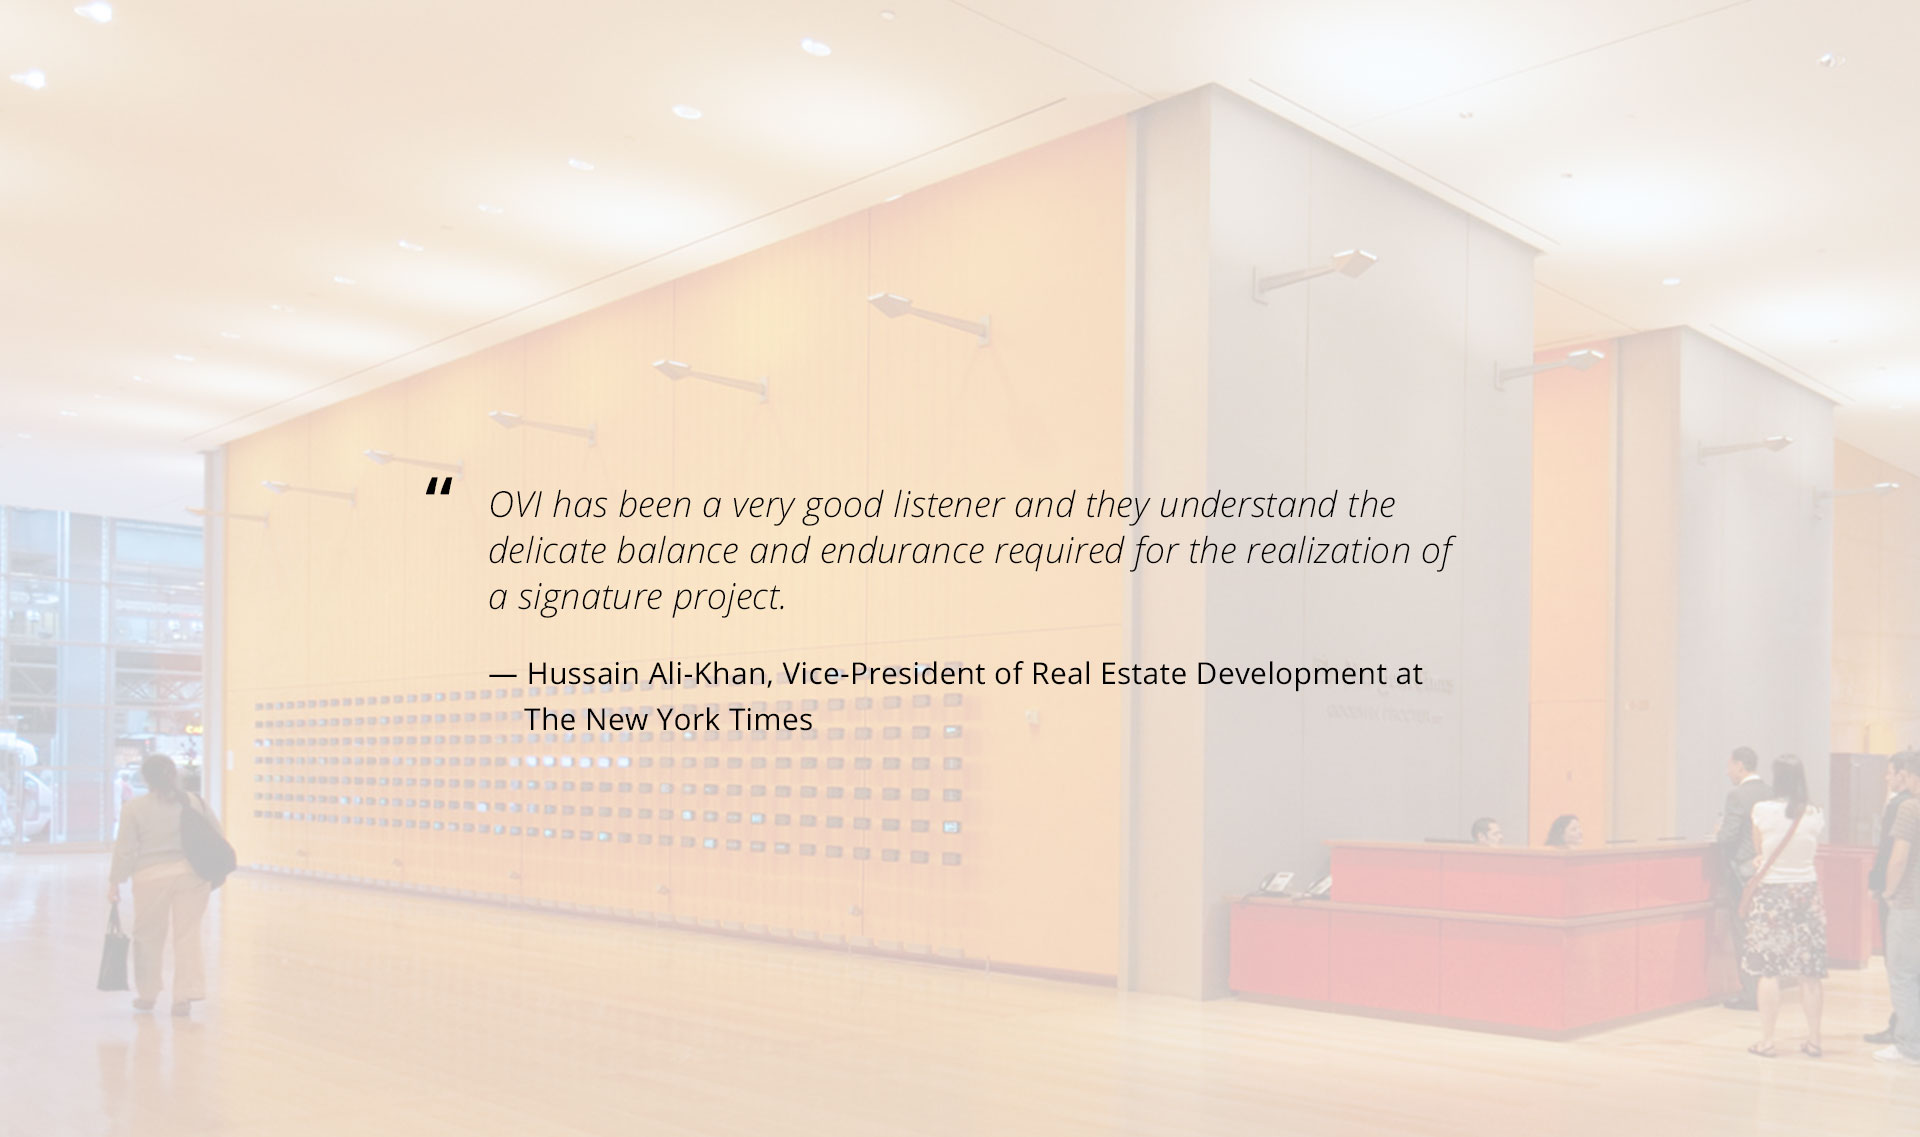 Testimonial about OVI from Hussain Ali-Khan, Vice-President of Real Estate Development at The New York Times